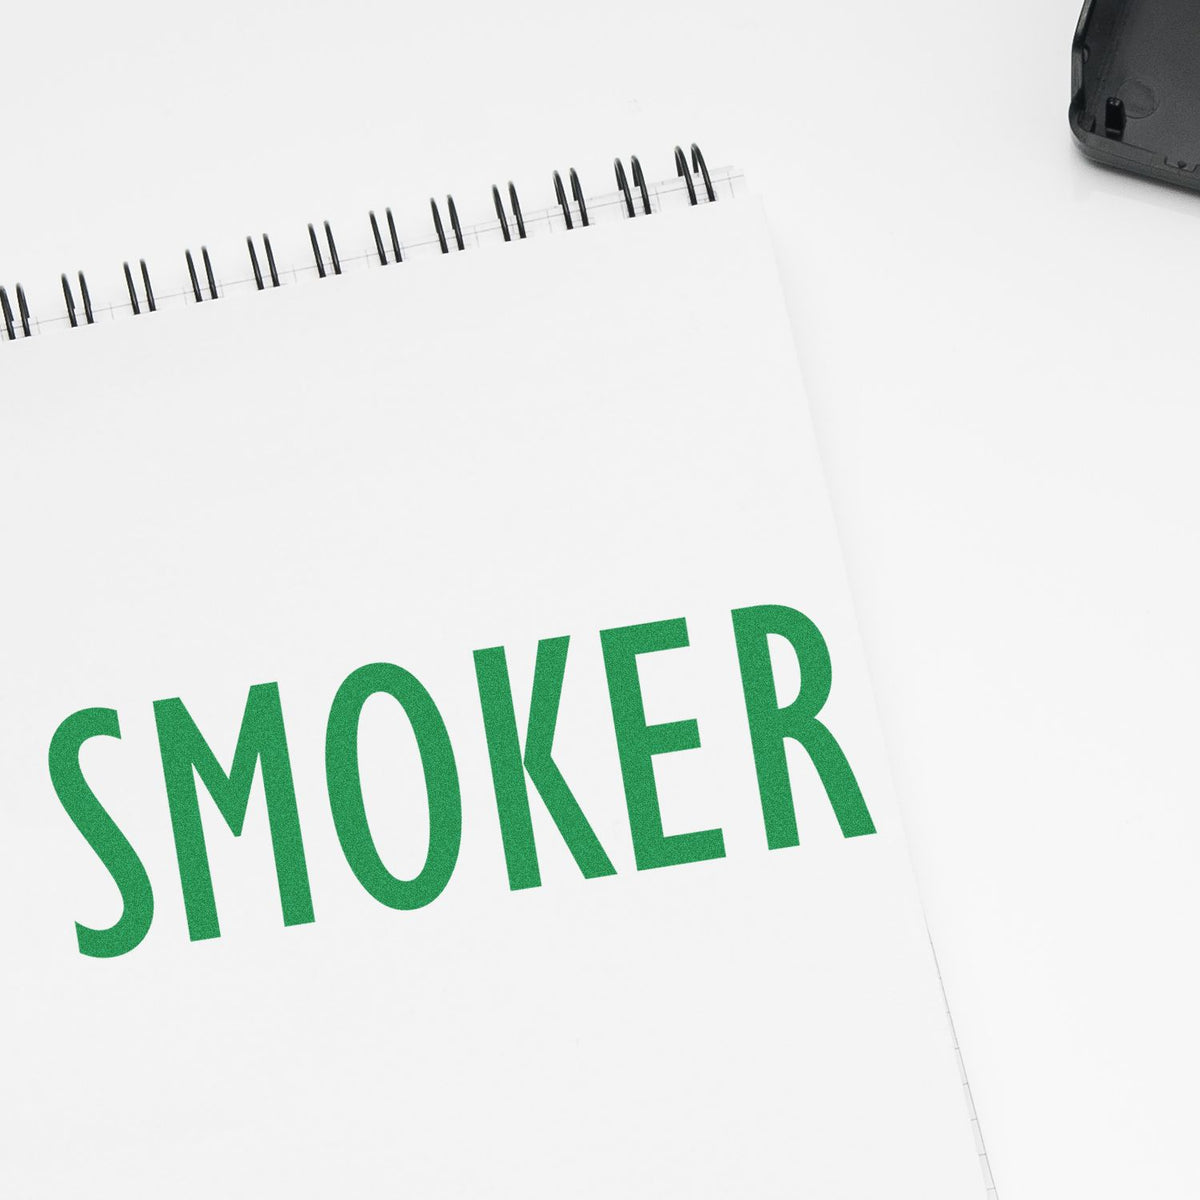 Medical Provider Smoker Rubber Stamp In Use